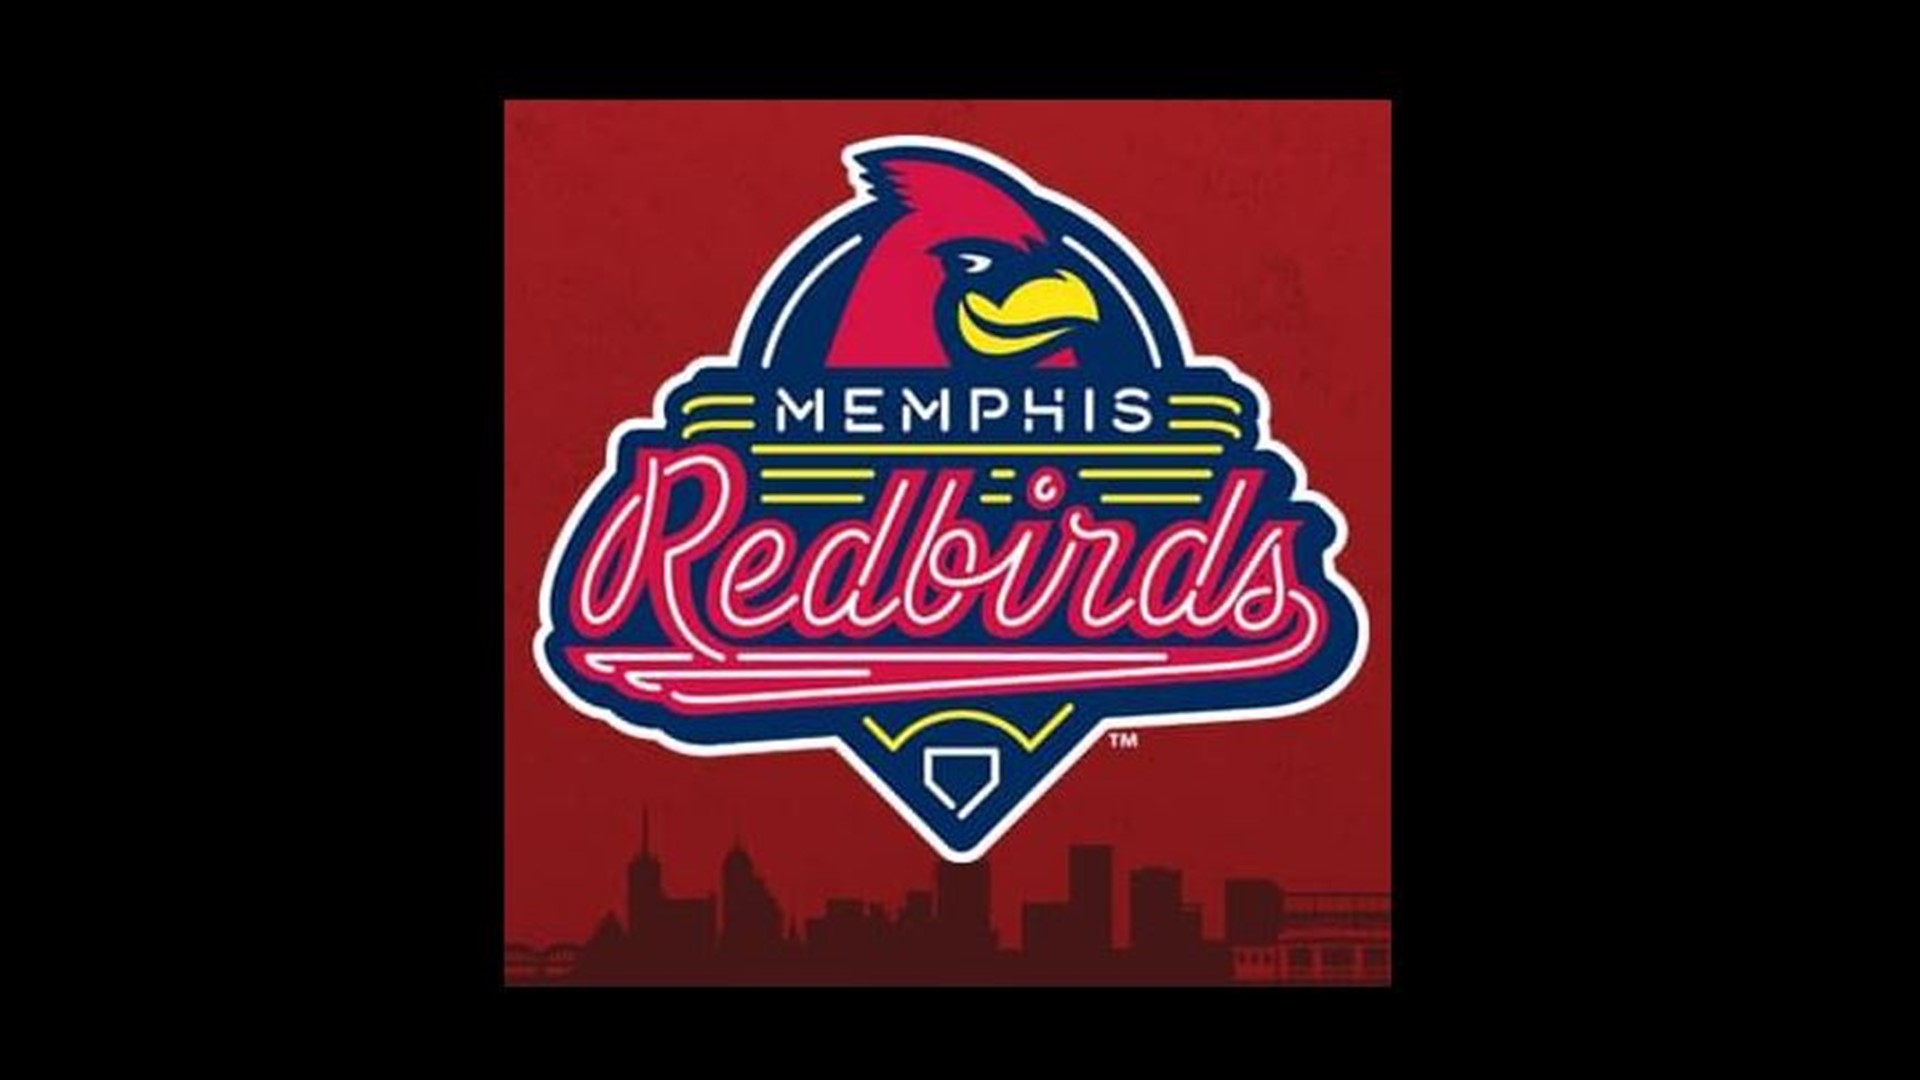 Memphis Redbirds singlegame tickets on sale now, opening night is